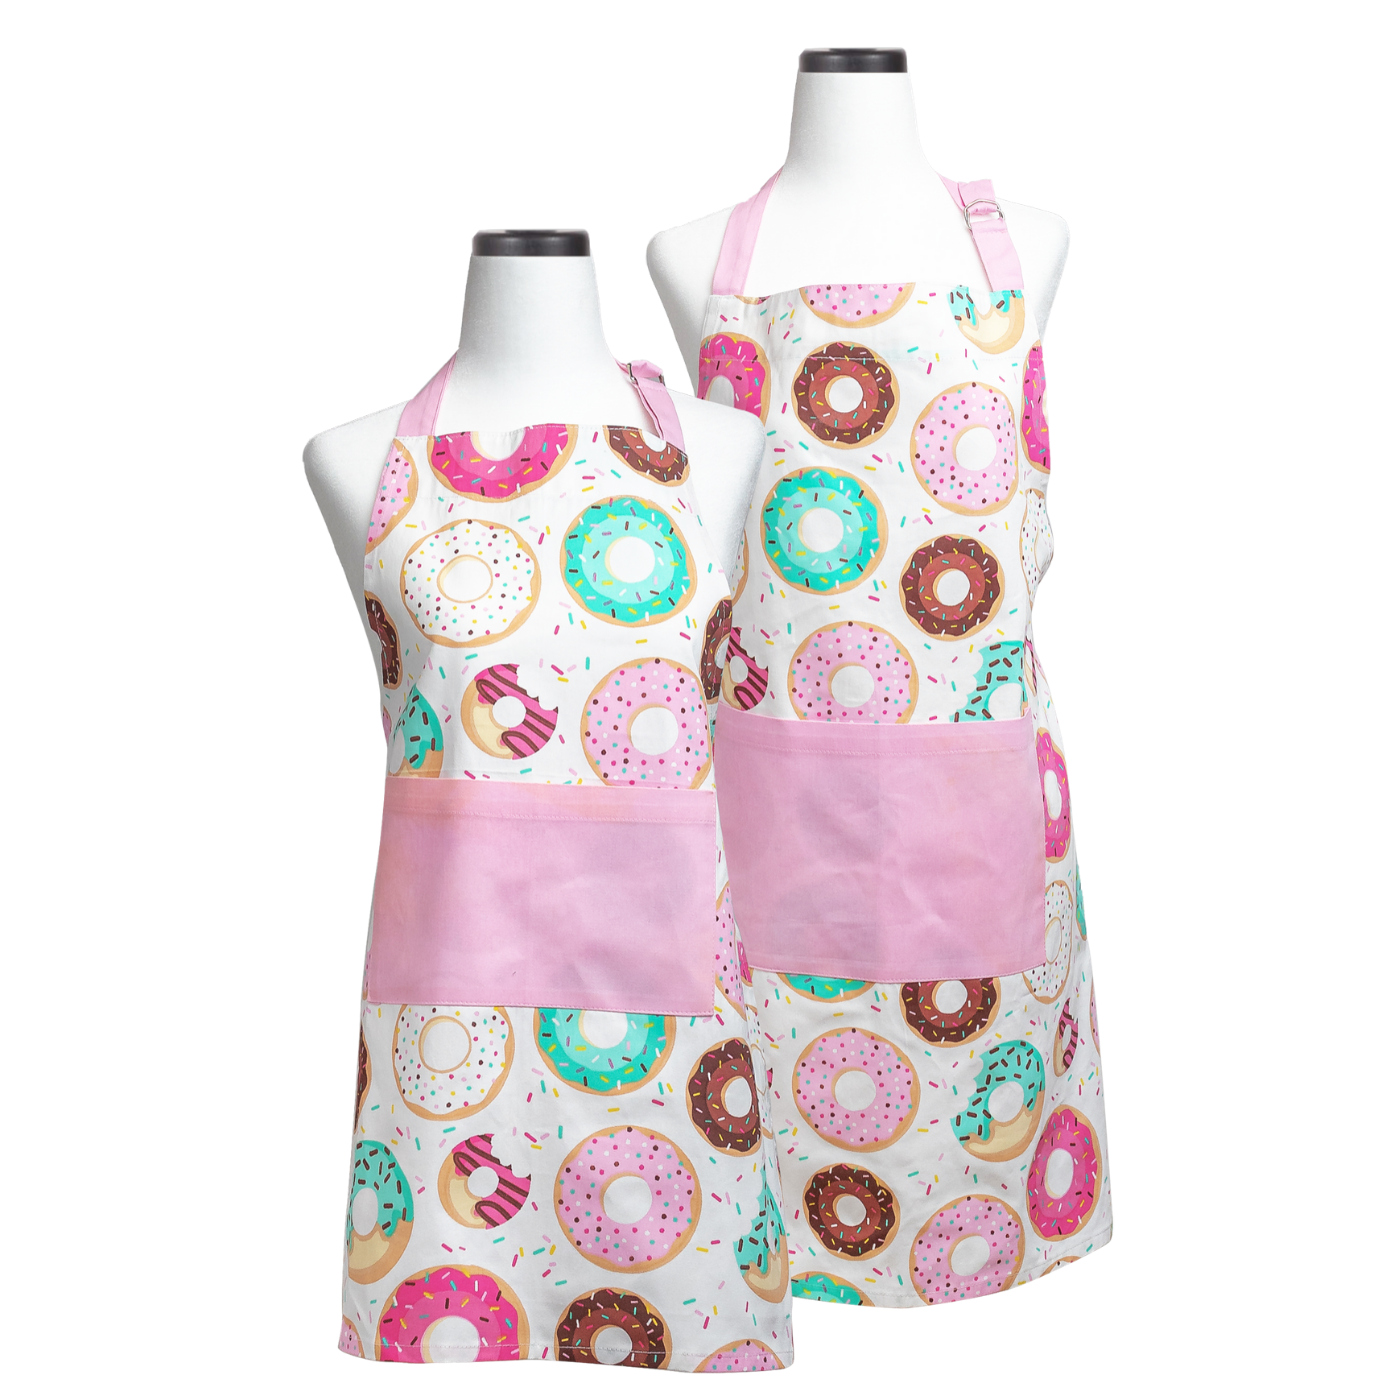 Funny Kitchen Apron for Women Cooking Apron With Pockets Party